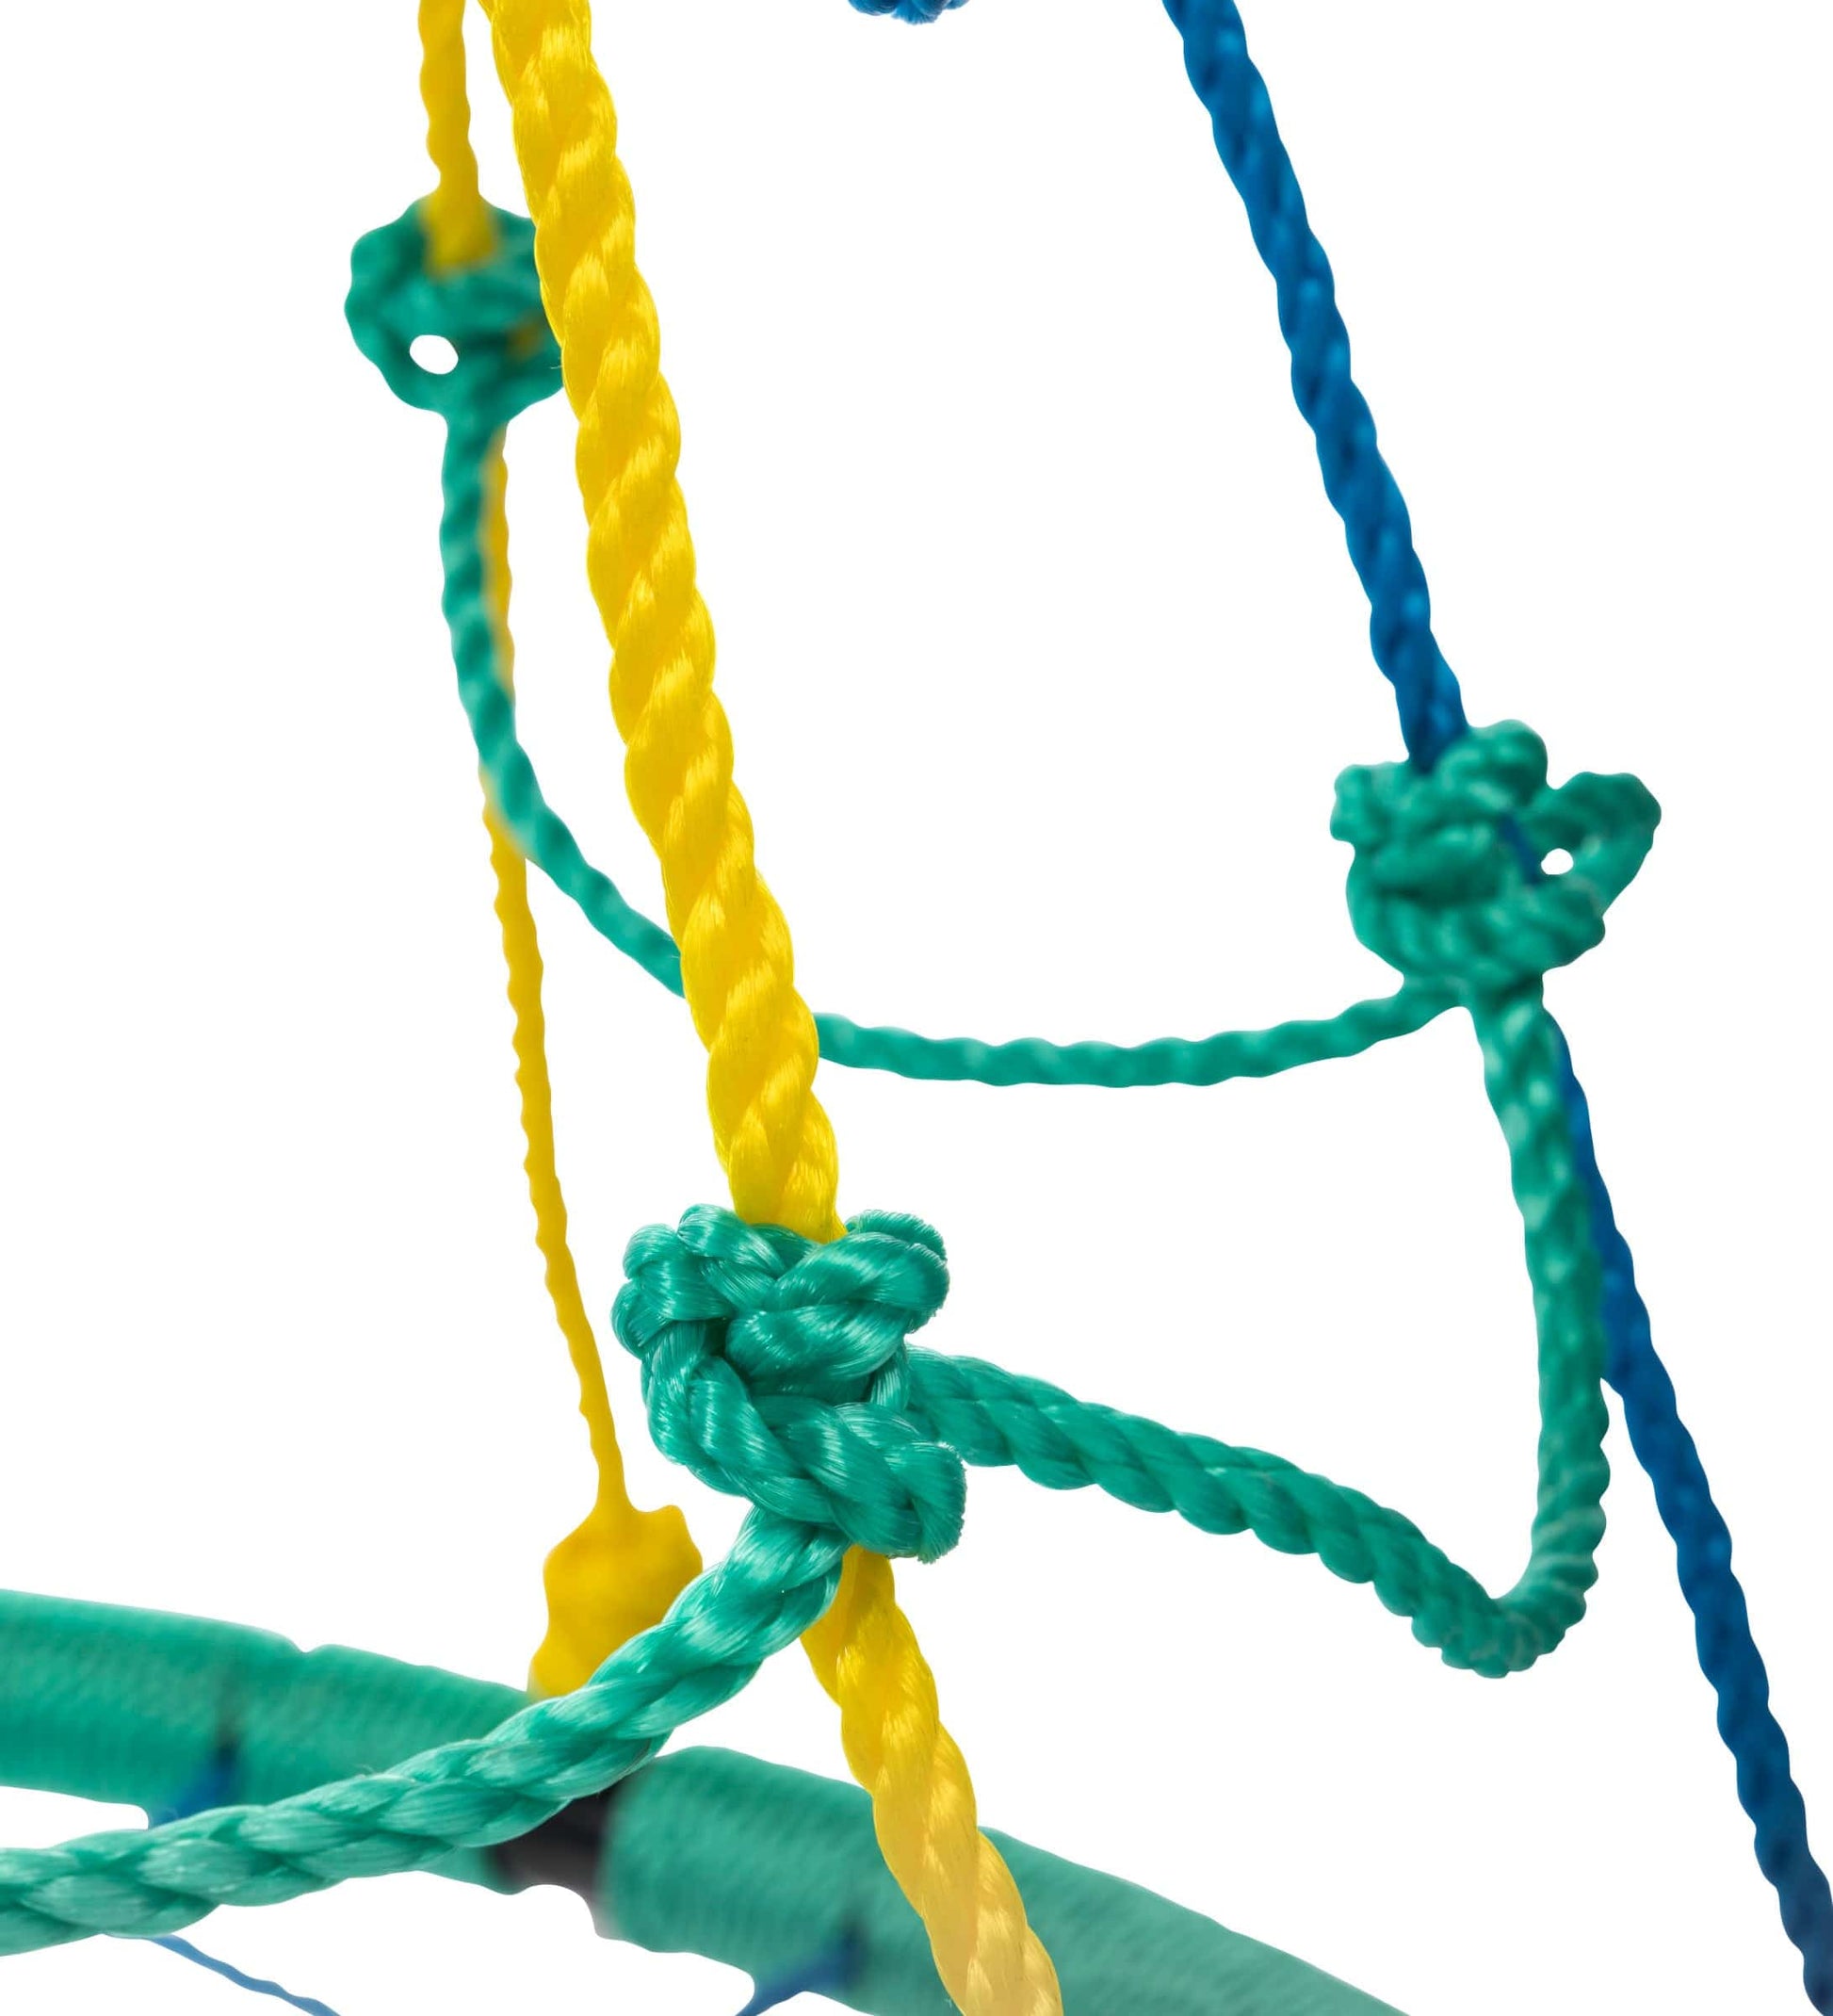 40-Inch 2-in-1 Colorful Climbing Rope Swing